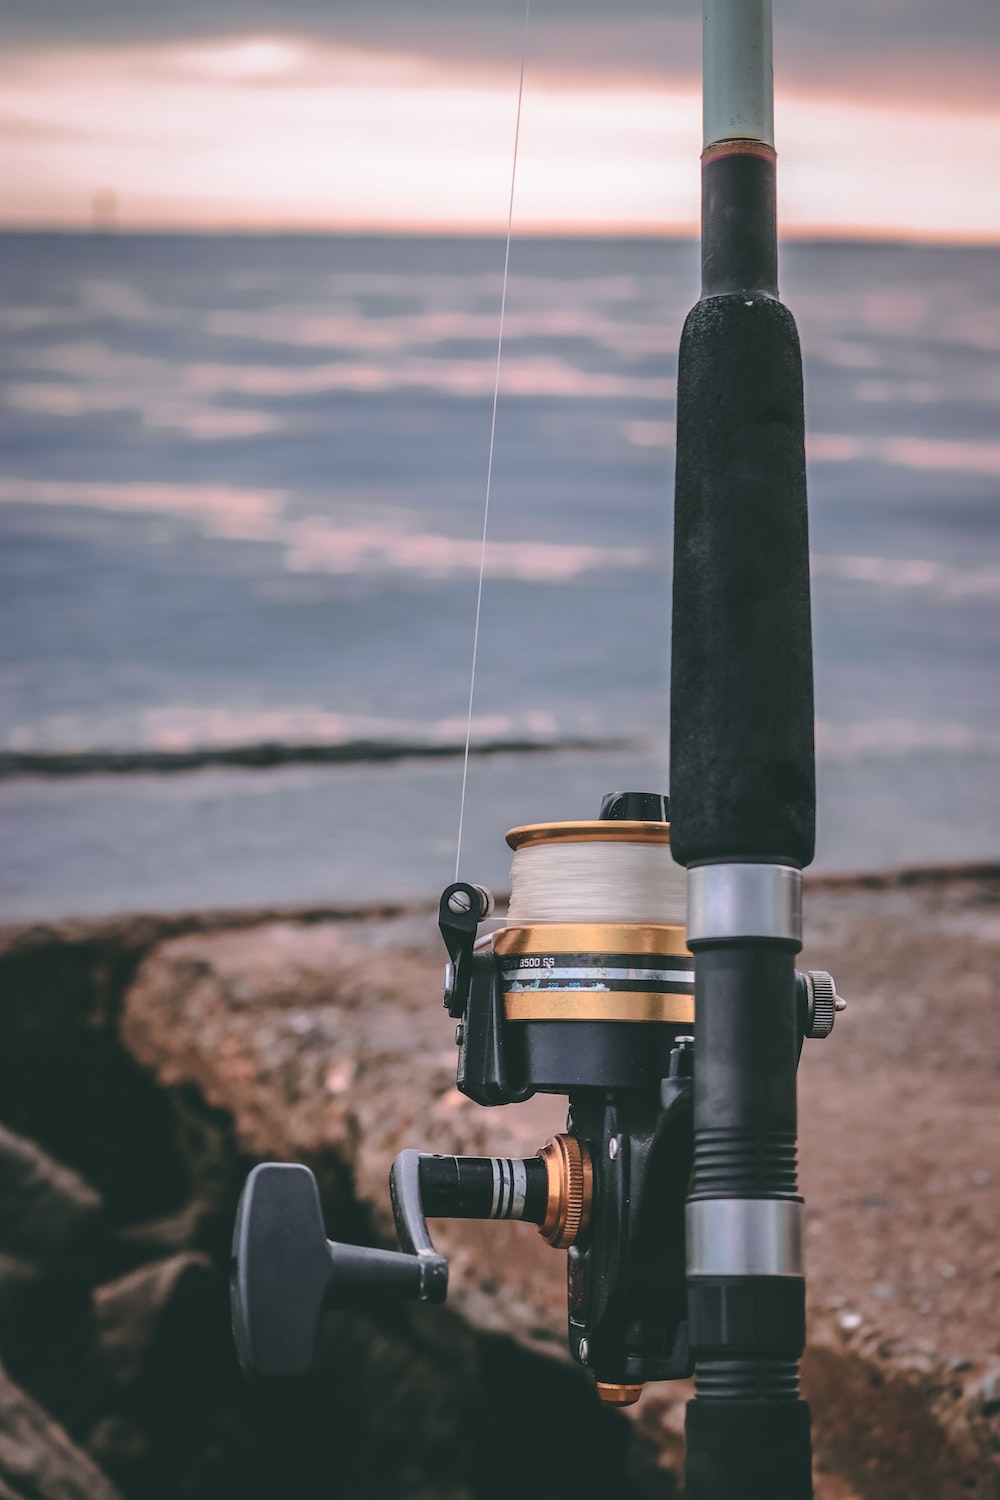 Fishing Pole Picture. Download Free Image